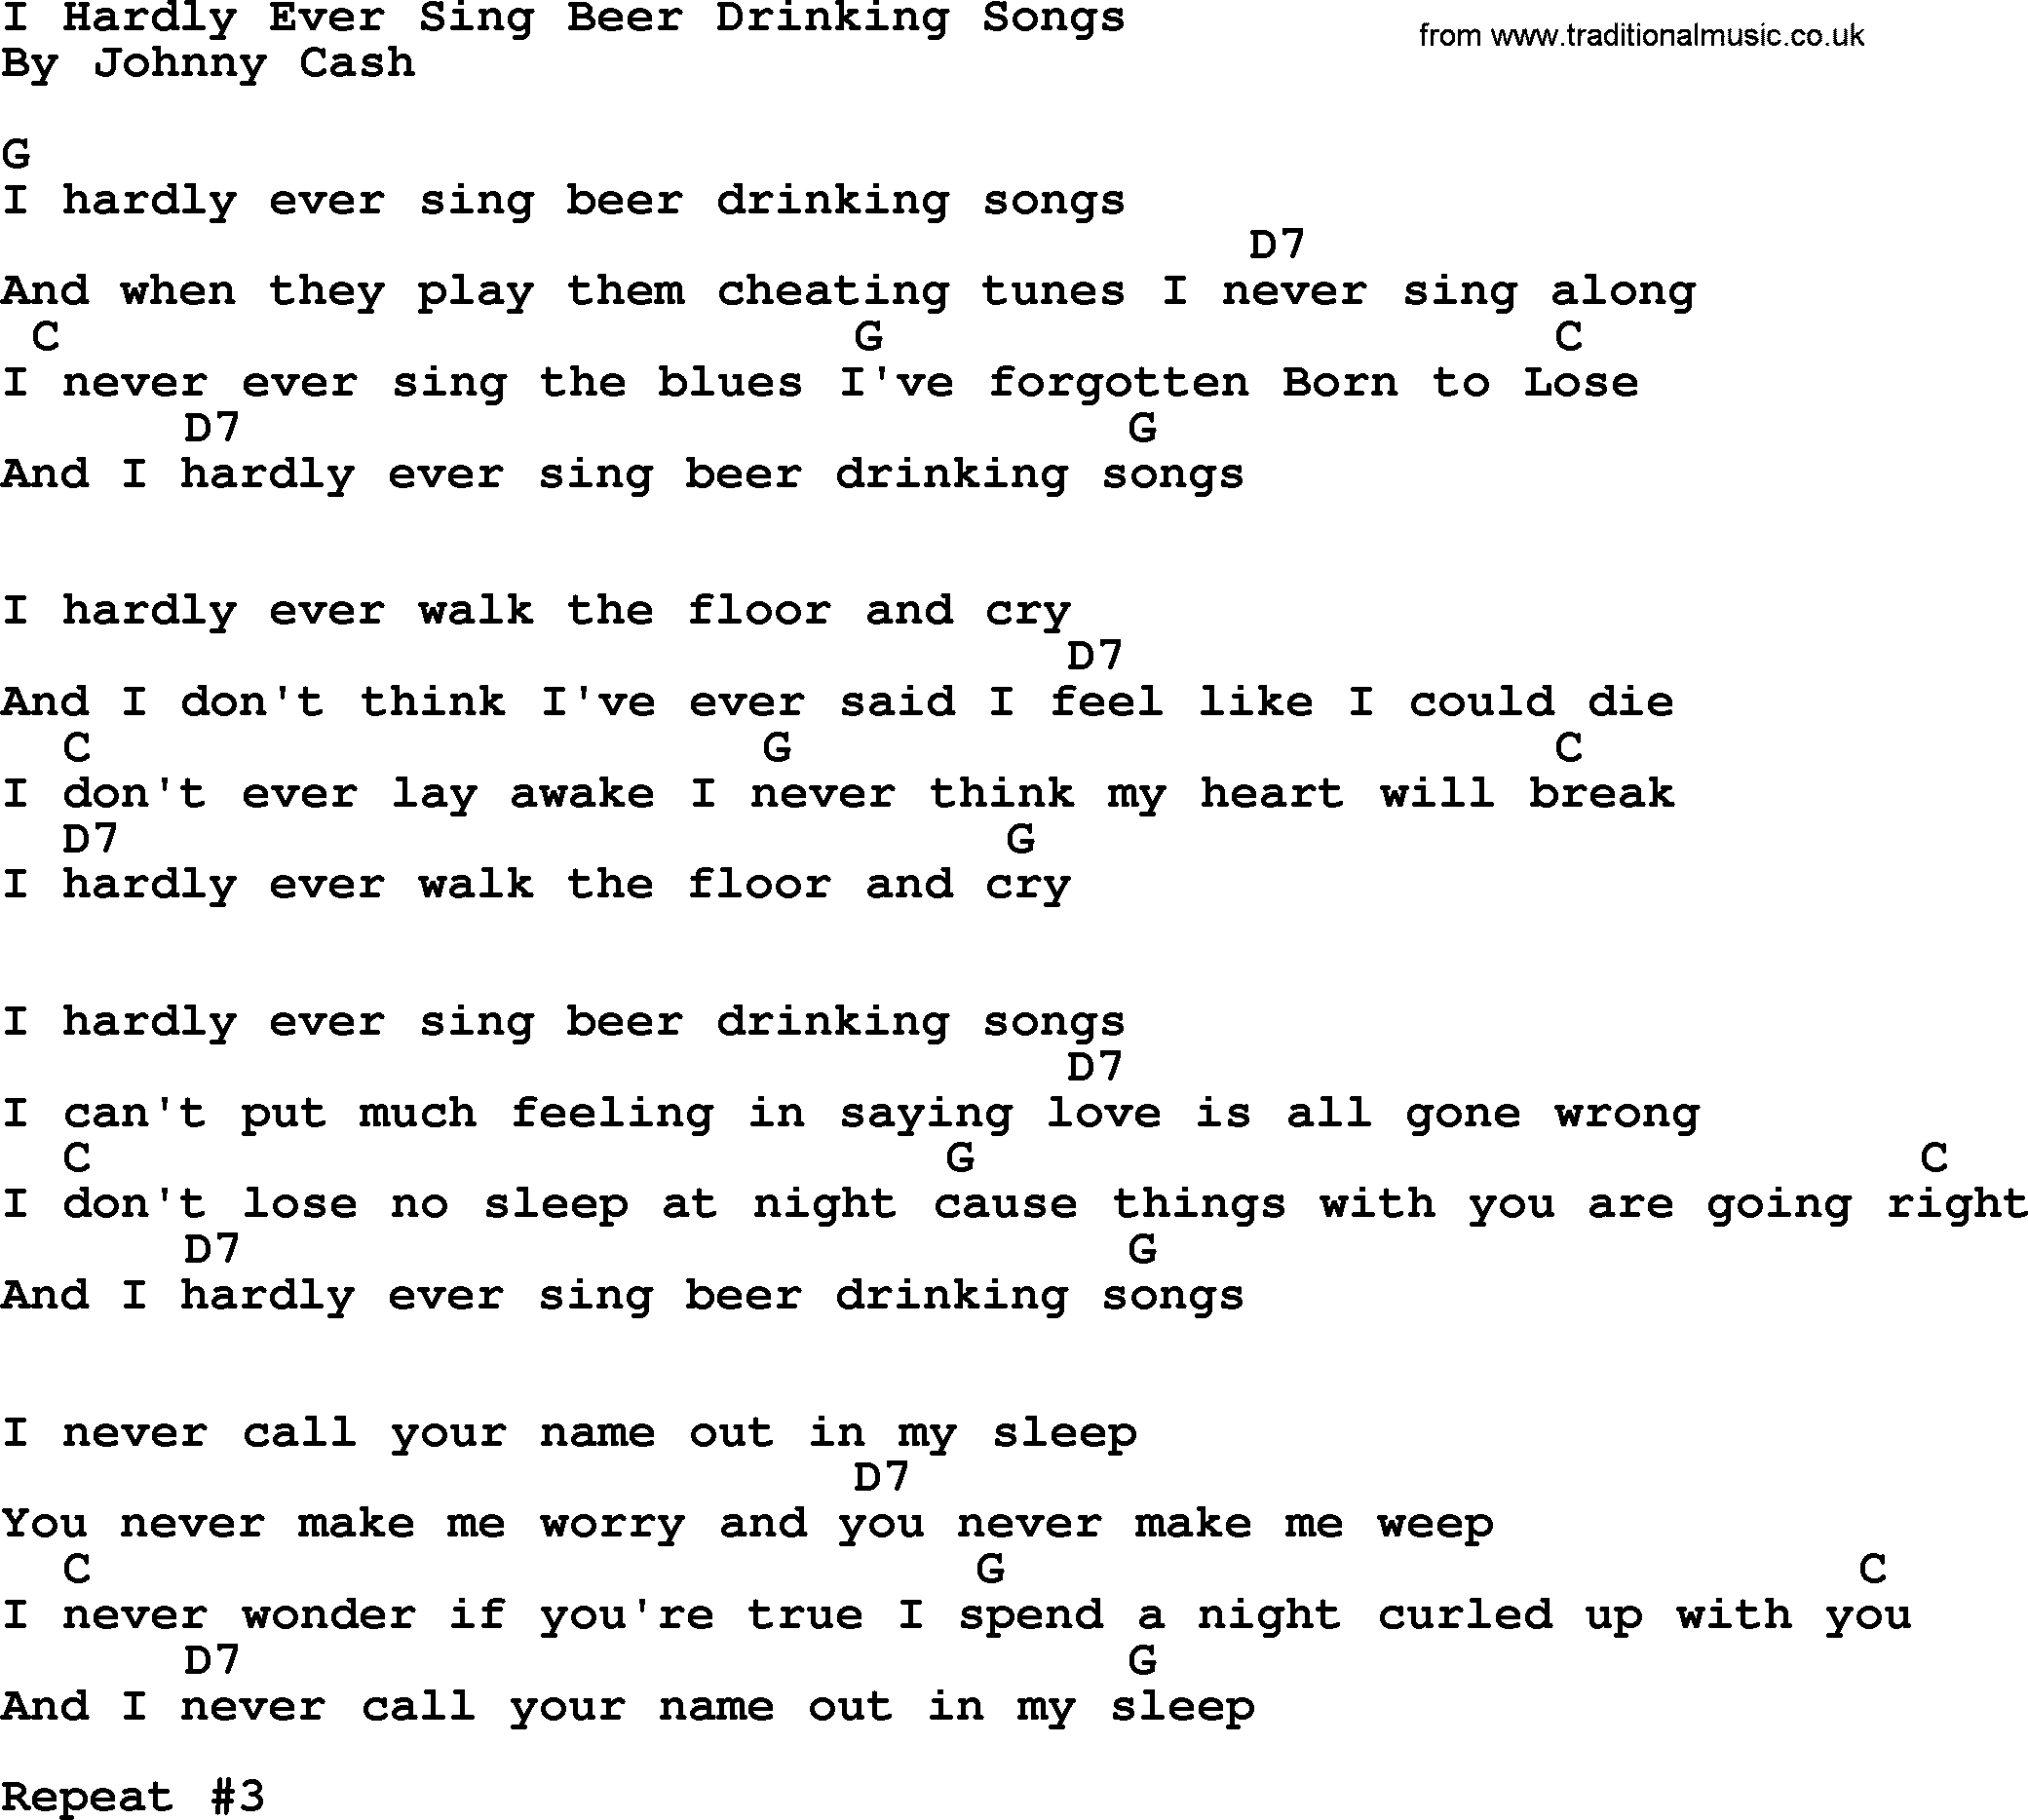 Johnny Cash song I Hardly Ever Sing Beer Drinking Songs, lyrics and chords